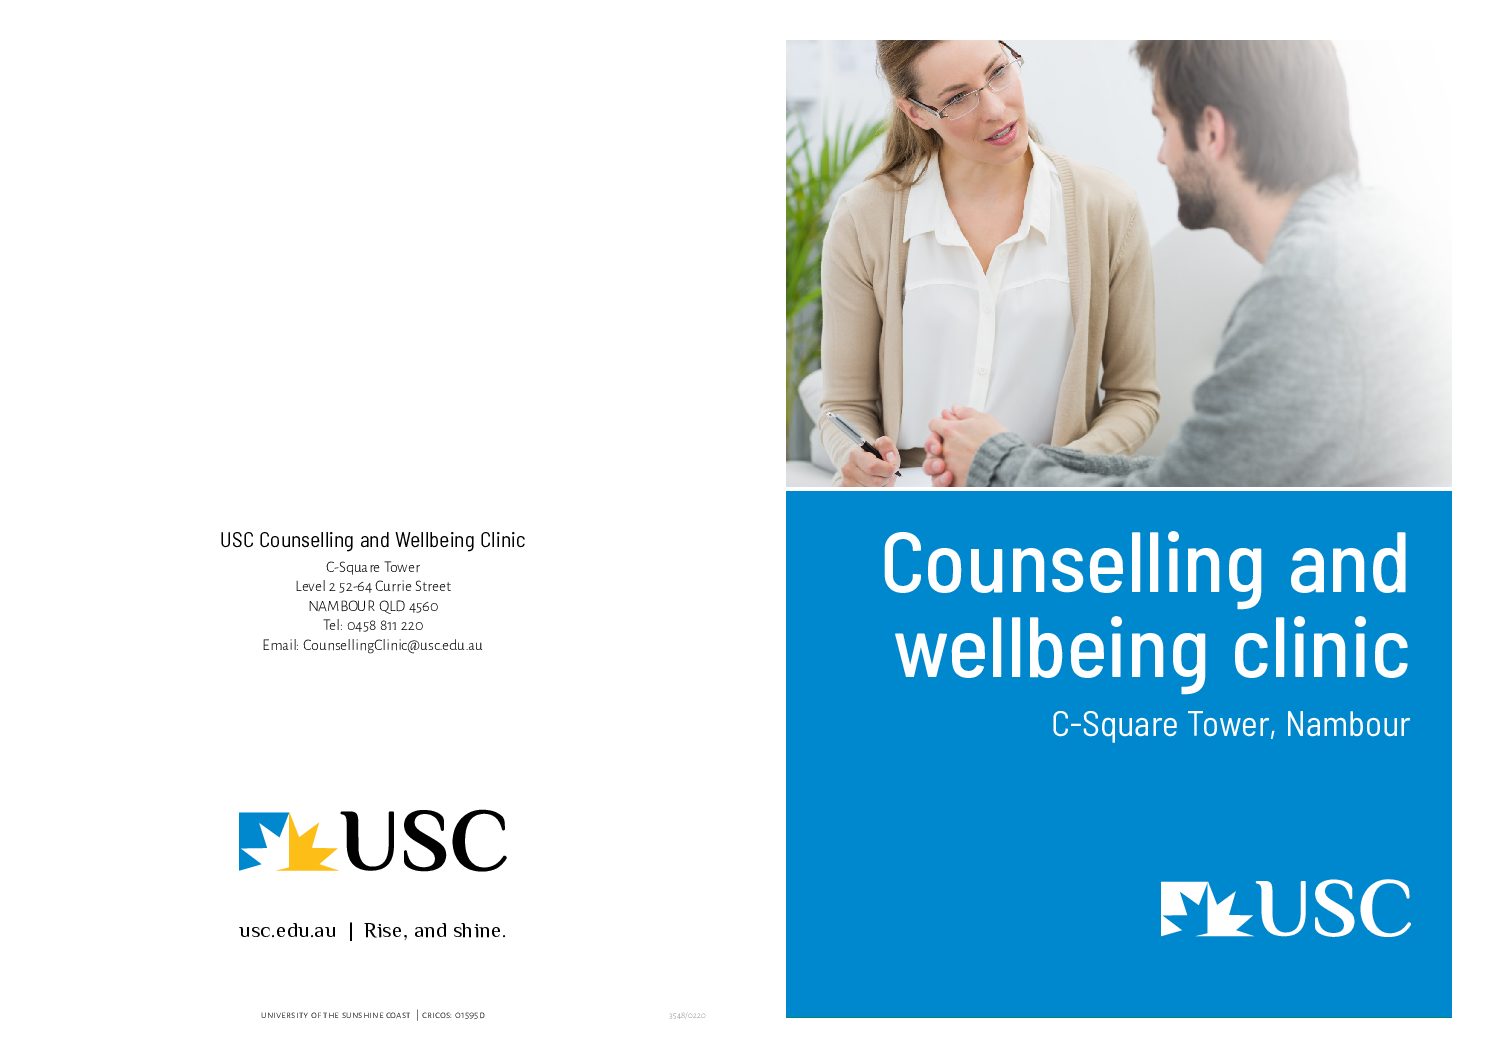 The USC Counselling and Wellbeing Clinic